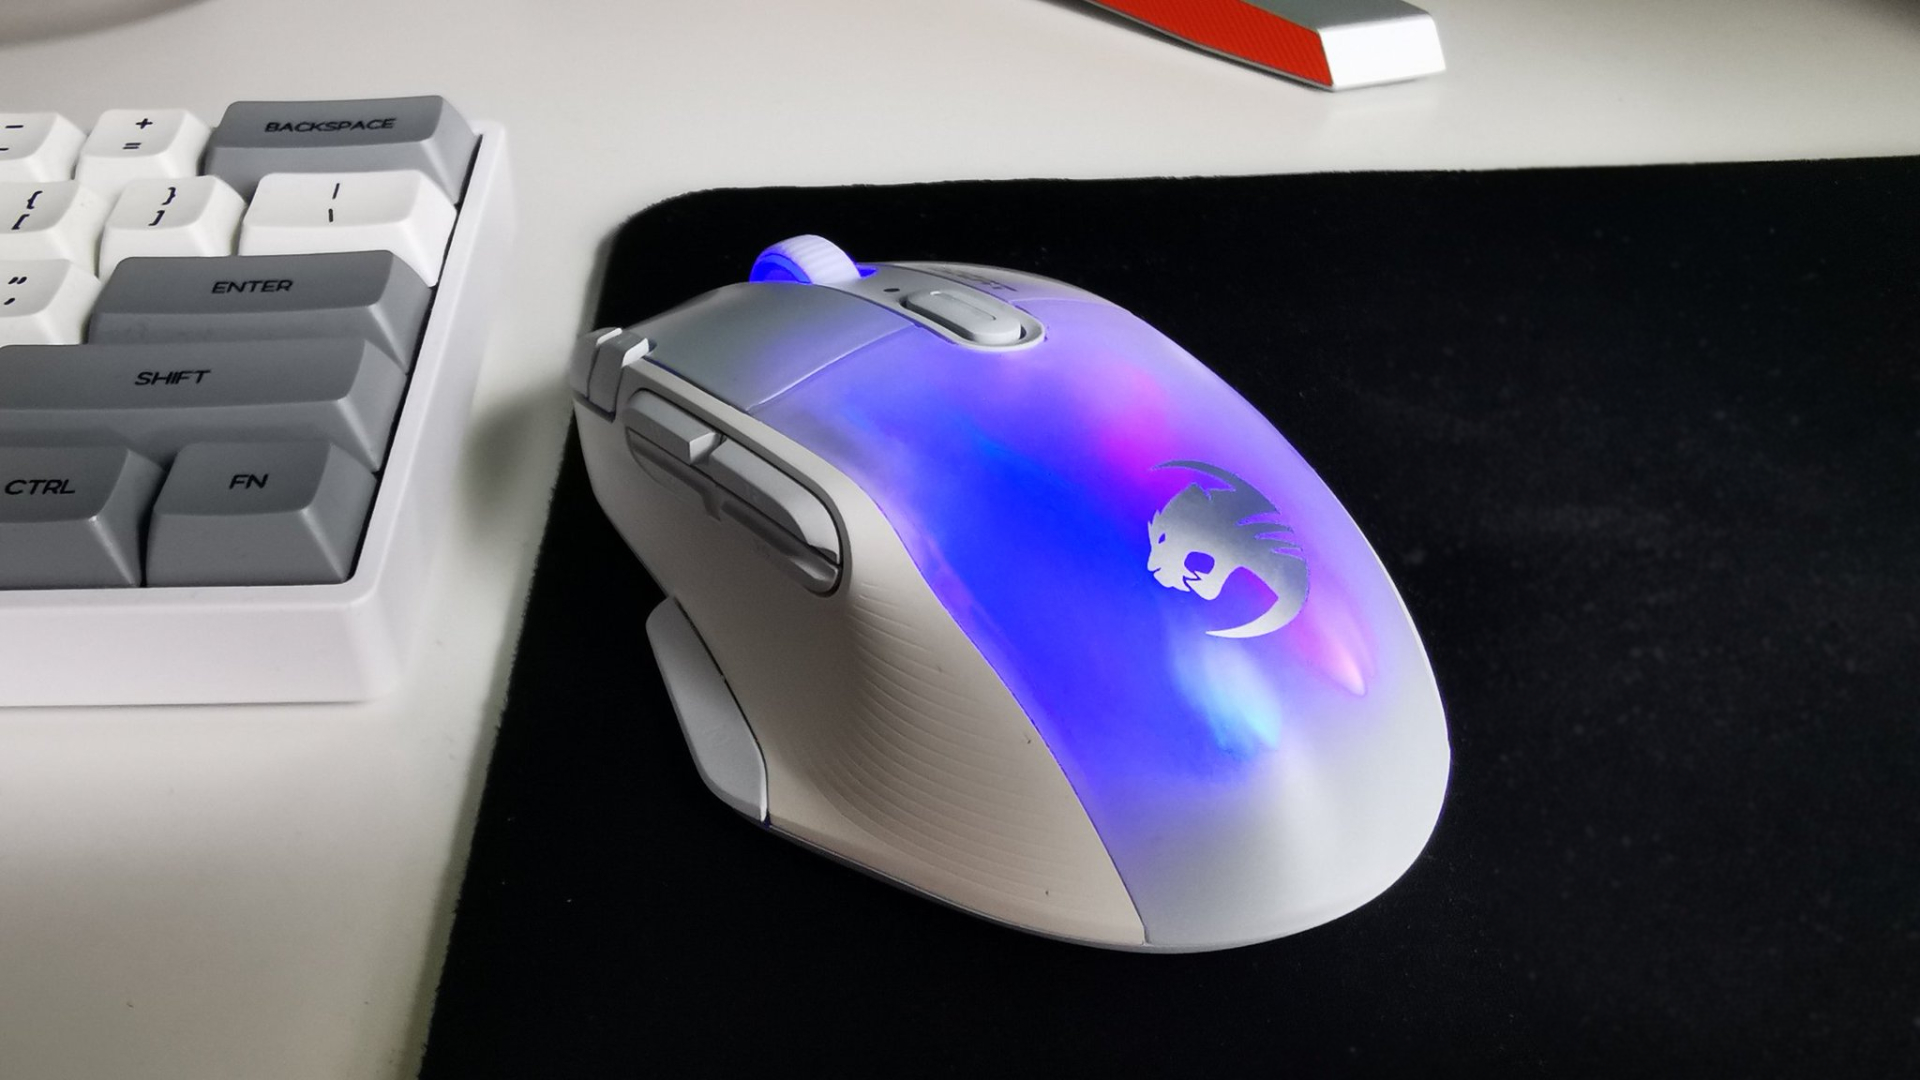 Roccat Kone XP Air review – great gaming mouse specs and RGB